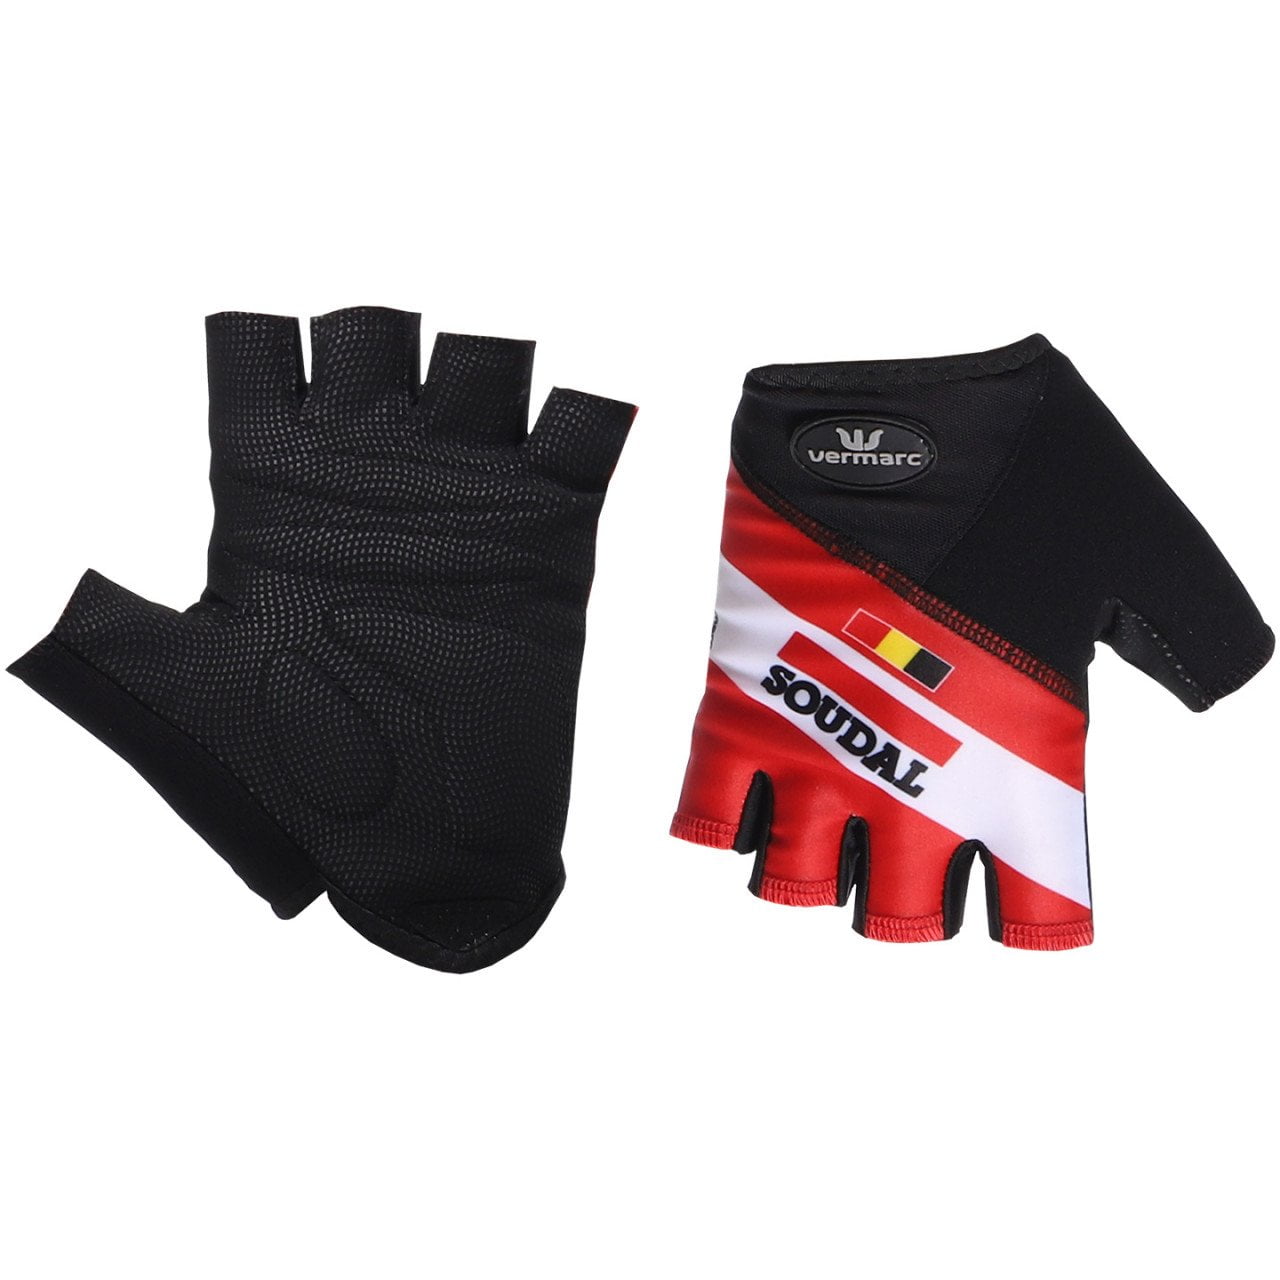 LOTTO SOUDAL WB Cycling Gloves 2022